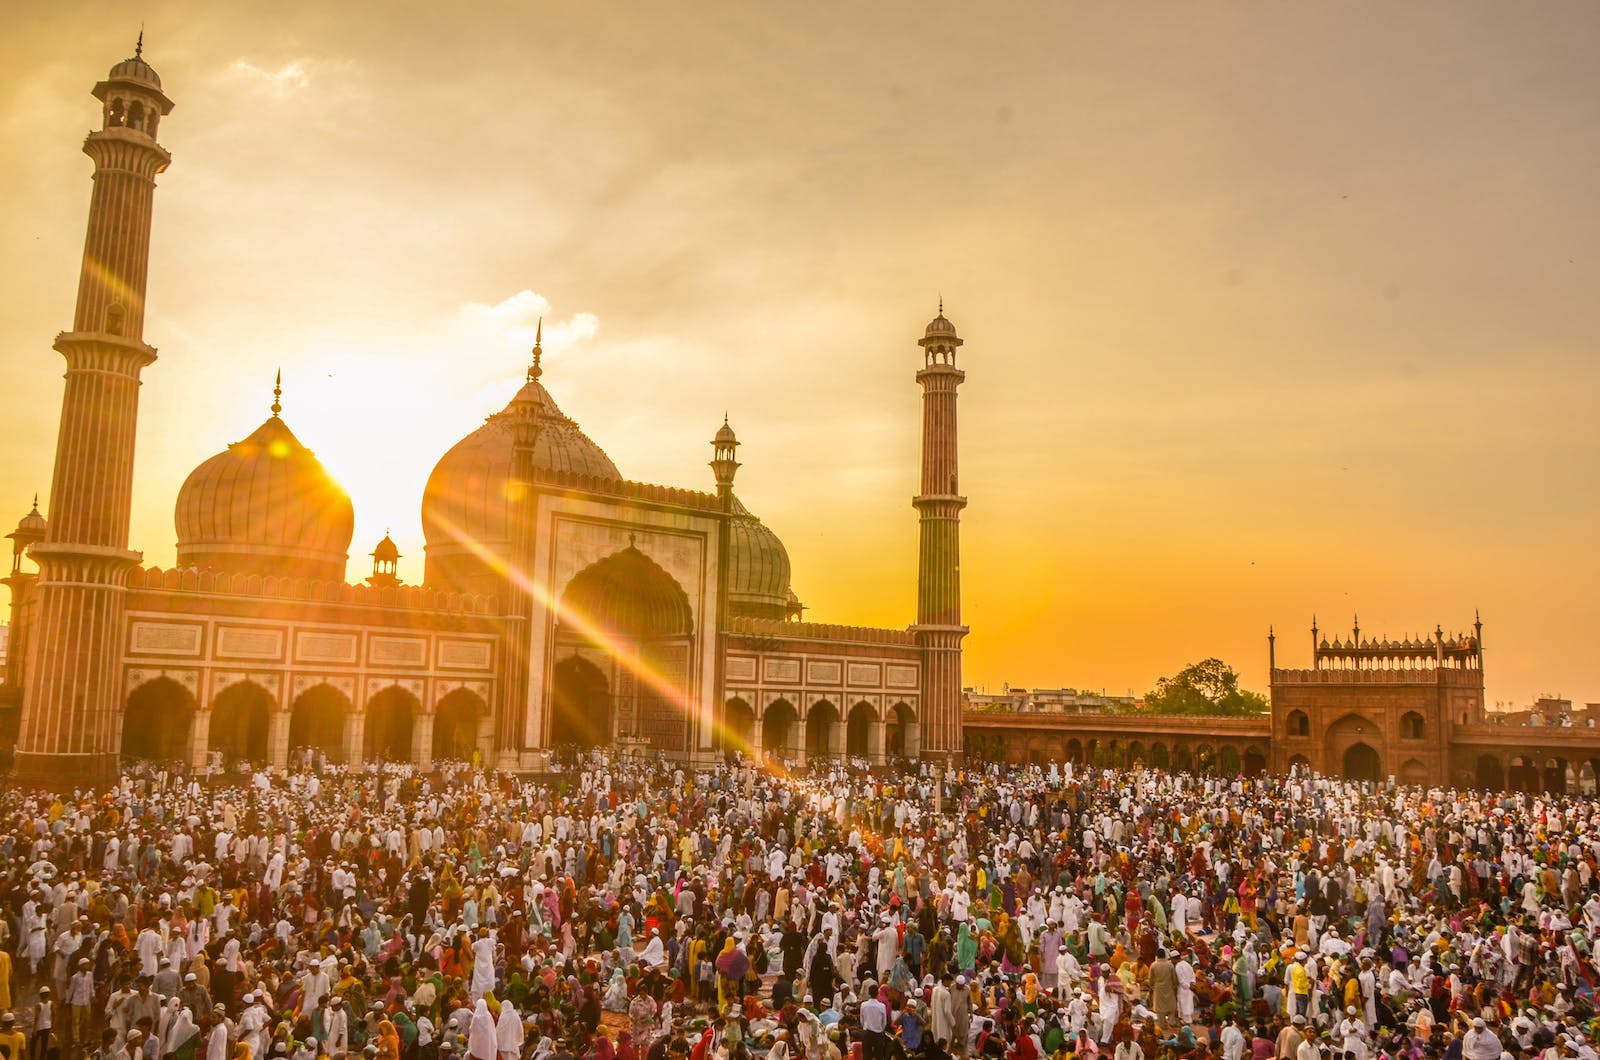 Photo Of People In Front Of Mosque During Golden Hour